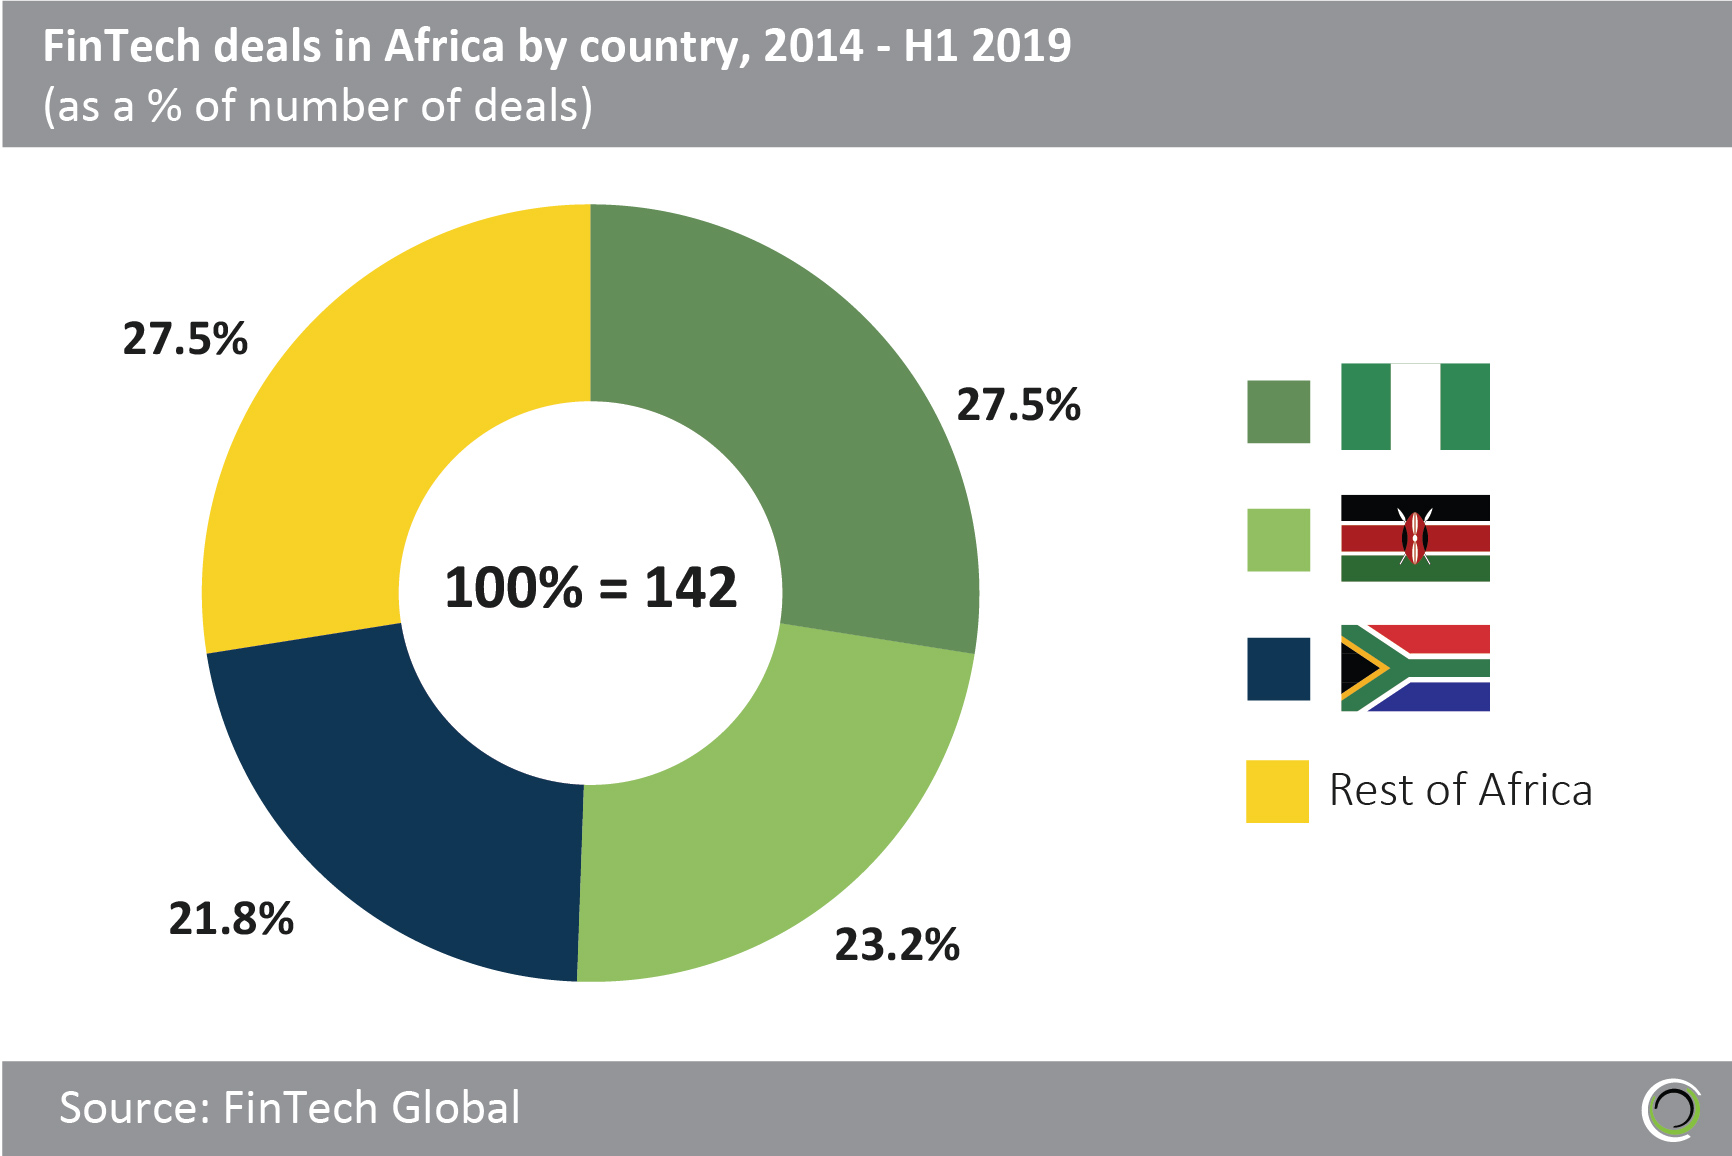 FinTech deals in Africa by country 2014 - 2019